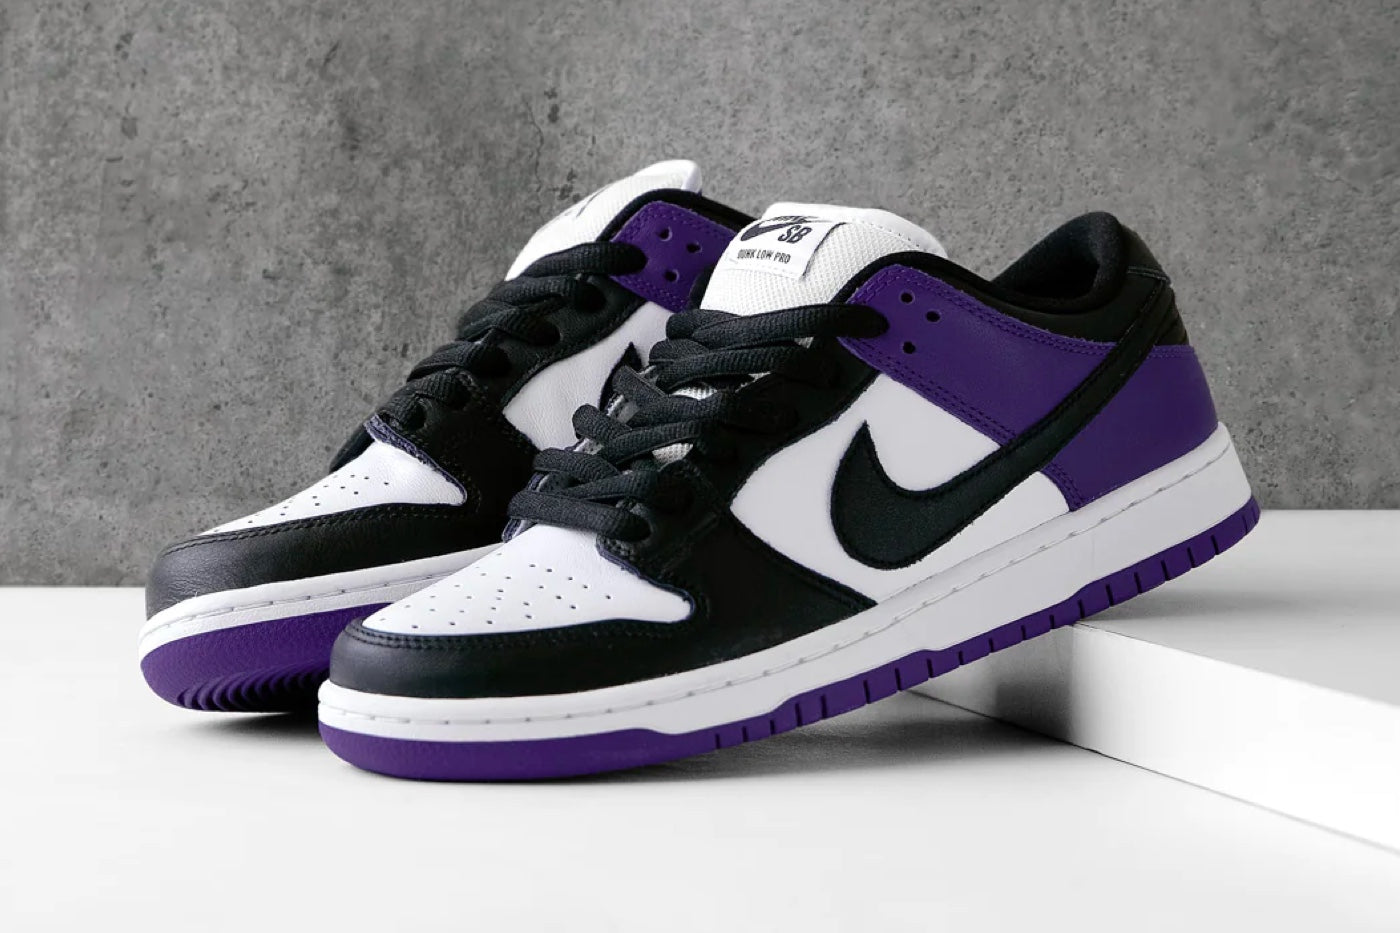 The Nike SB Dunk Low "Court Purple" is Getting a Big Restock